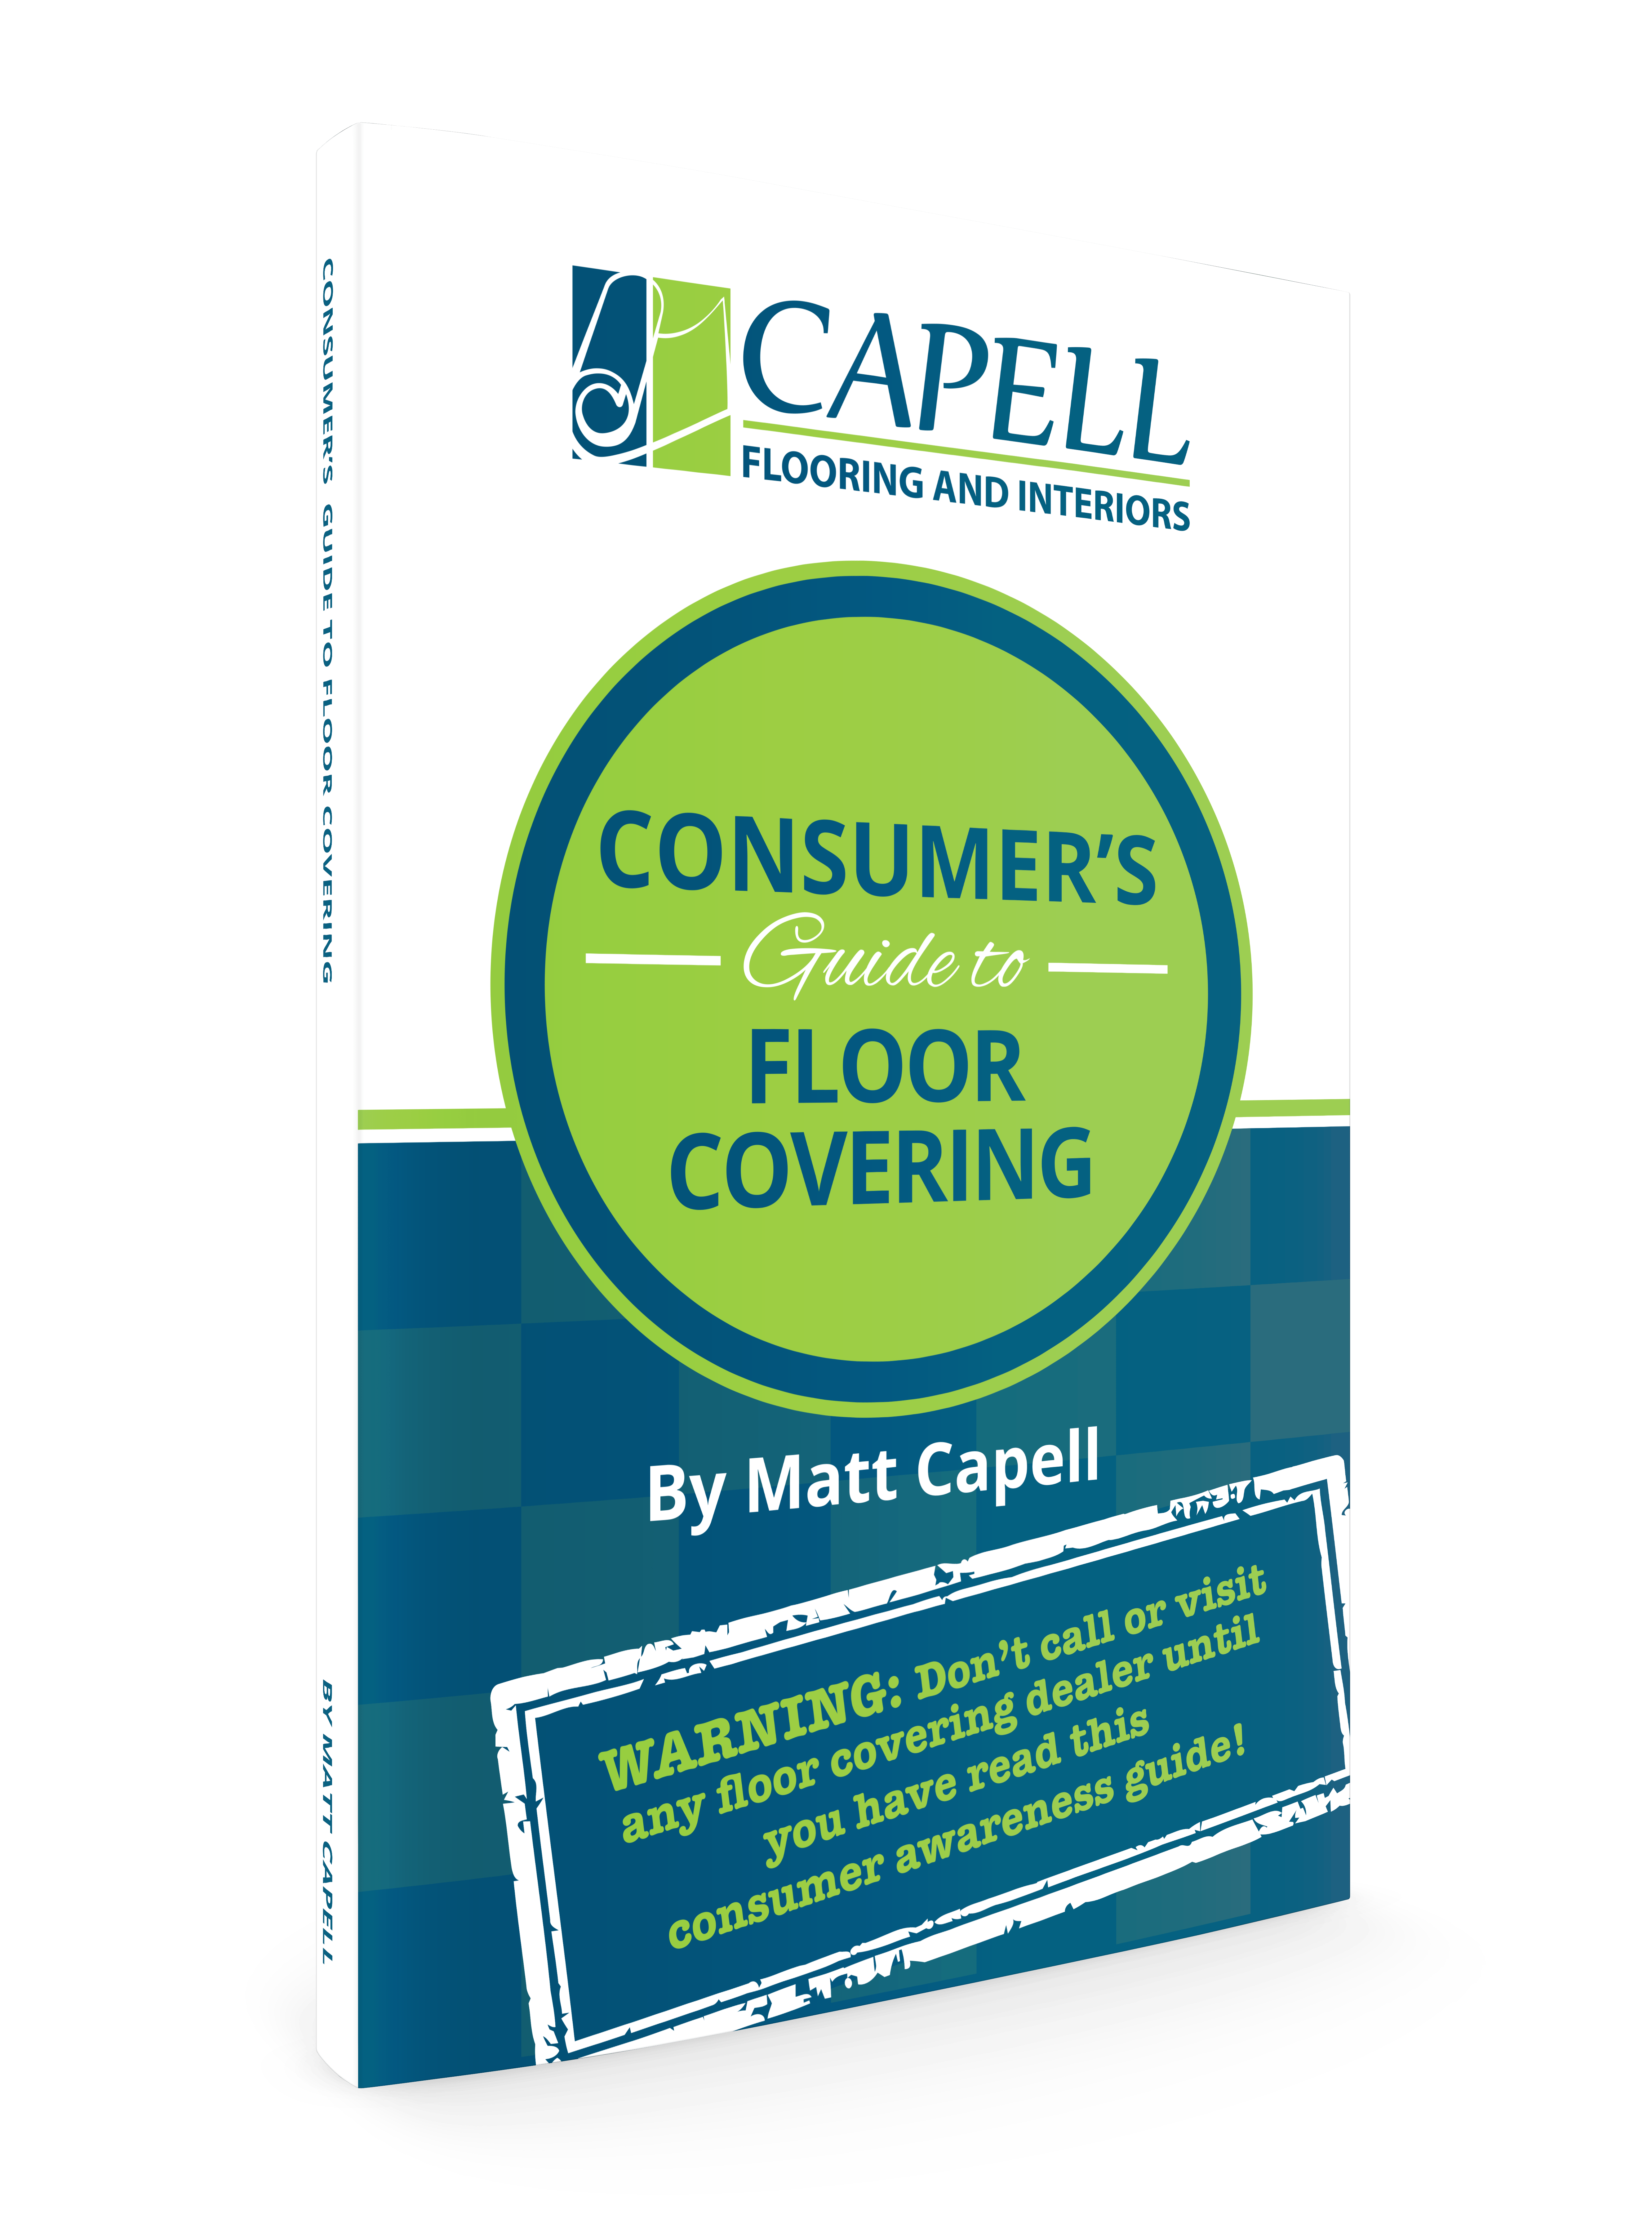 Capell Flooring and Interiors - Consumer's Guide to Flooring, Boise